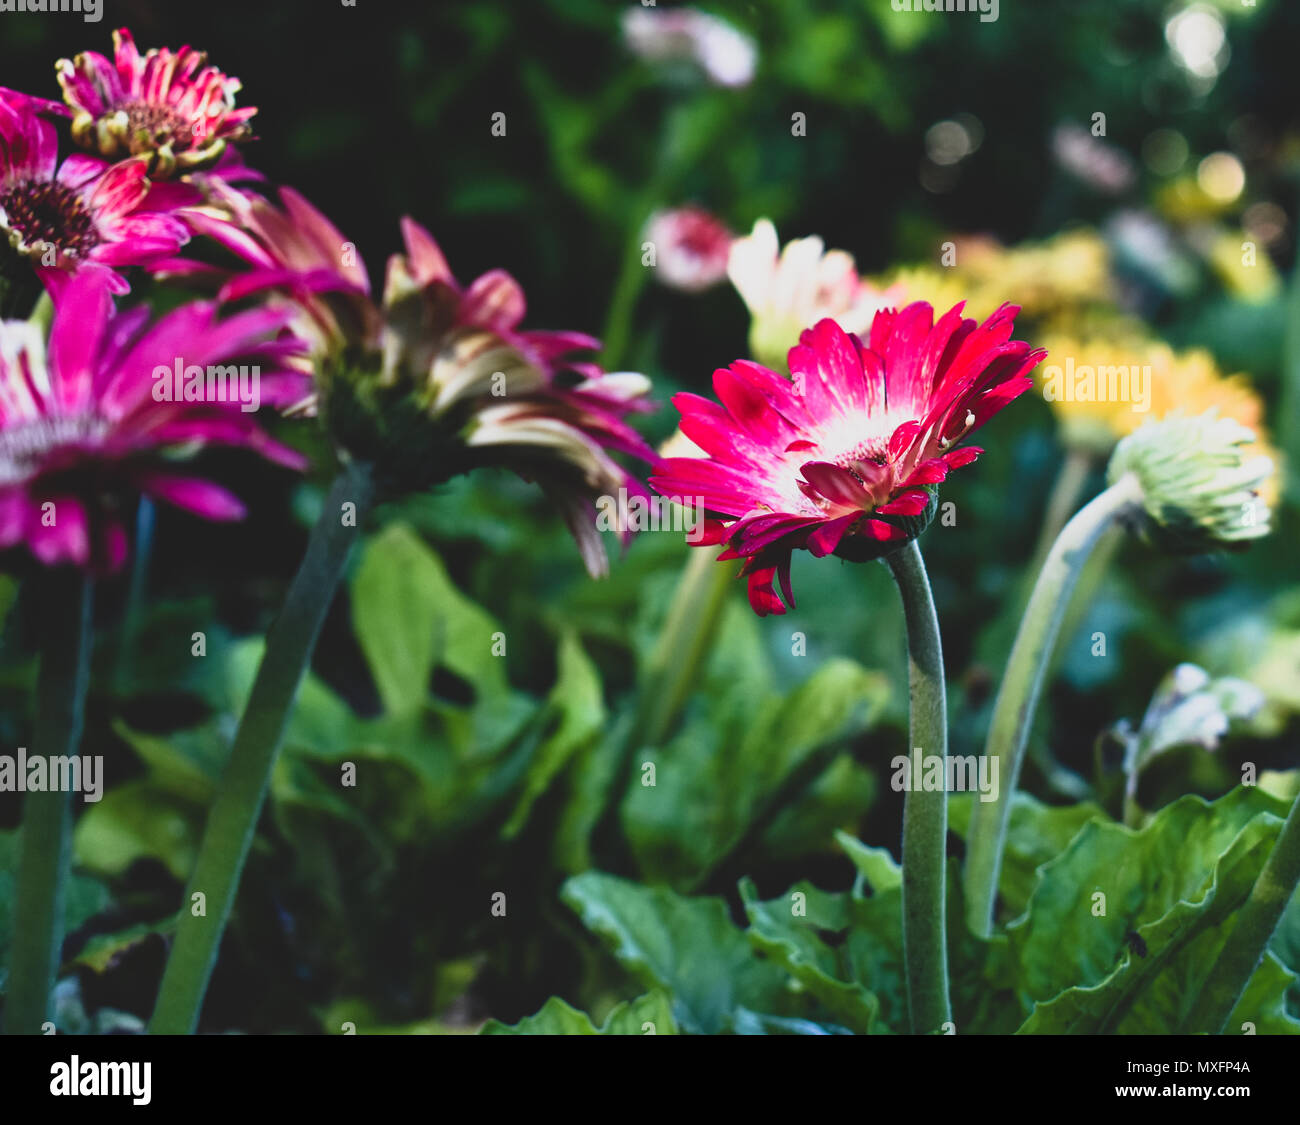 garden of mixed color flowers in the evening sun Stock Photo